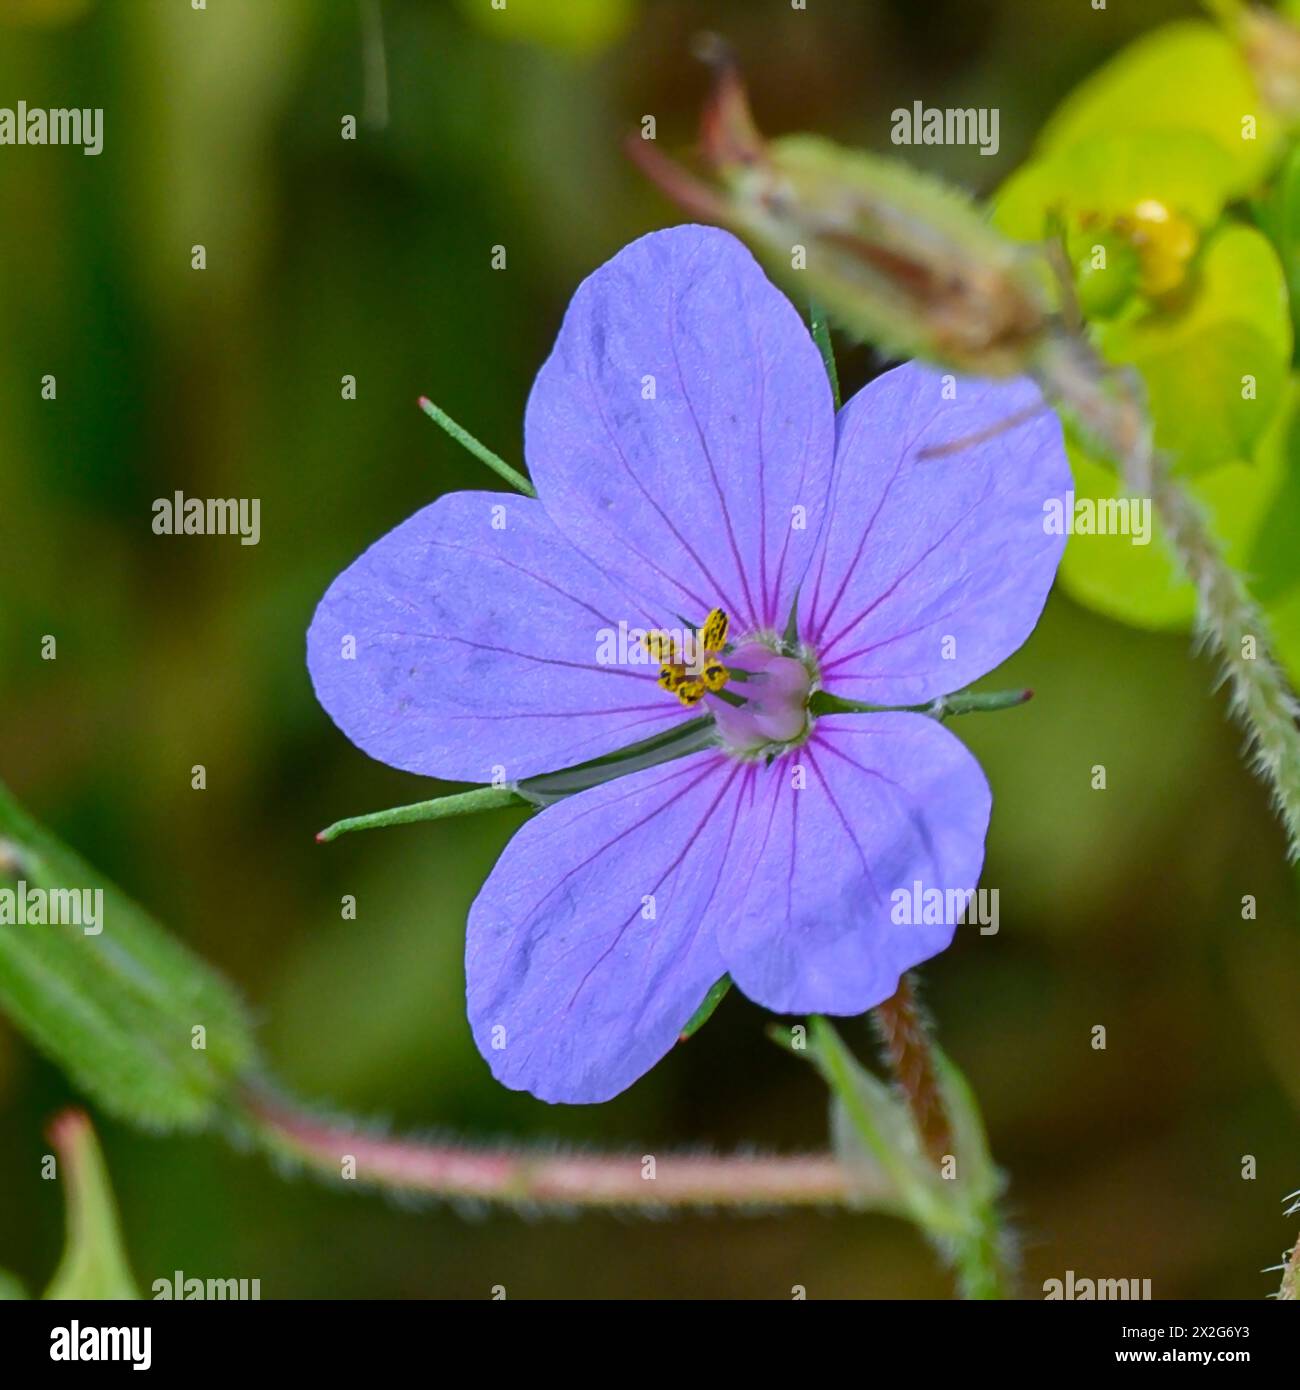 flowering Erodium ciconium common names hairy-pitted stork's-bill and shortfruit stork's bill. Photographed in the Lower Galilee, Israel in March Stock Photo